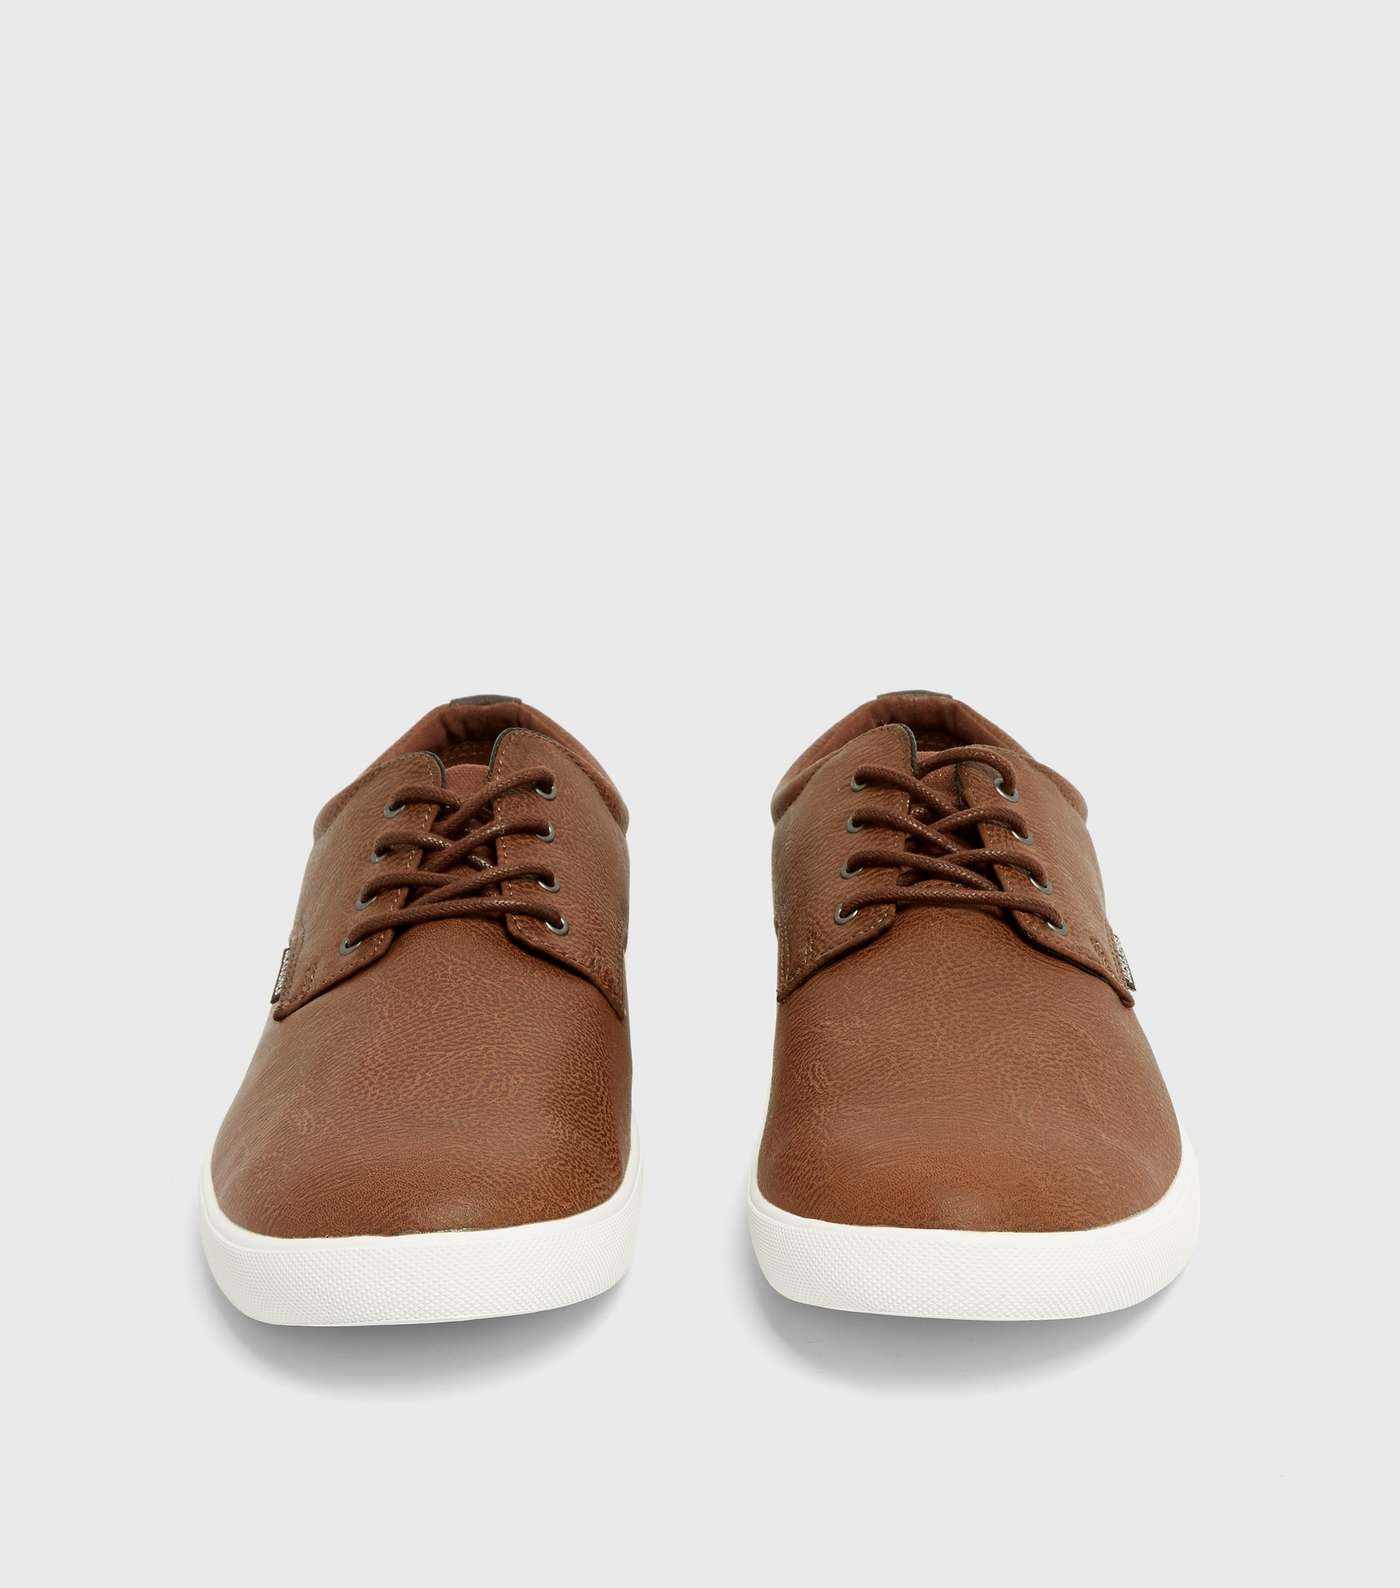 Jack & Jones Brown Lace Up Trainers Image 3